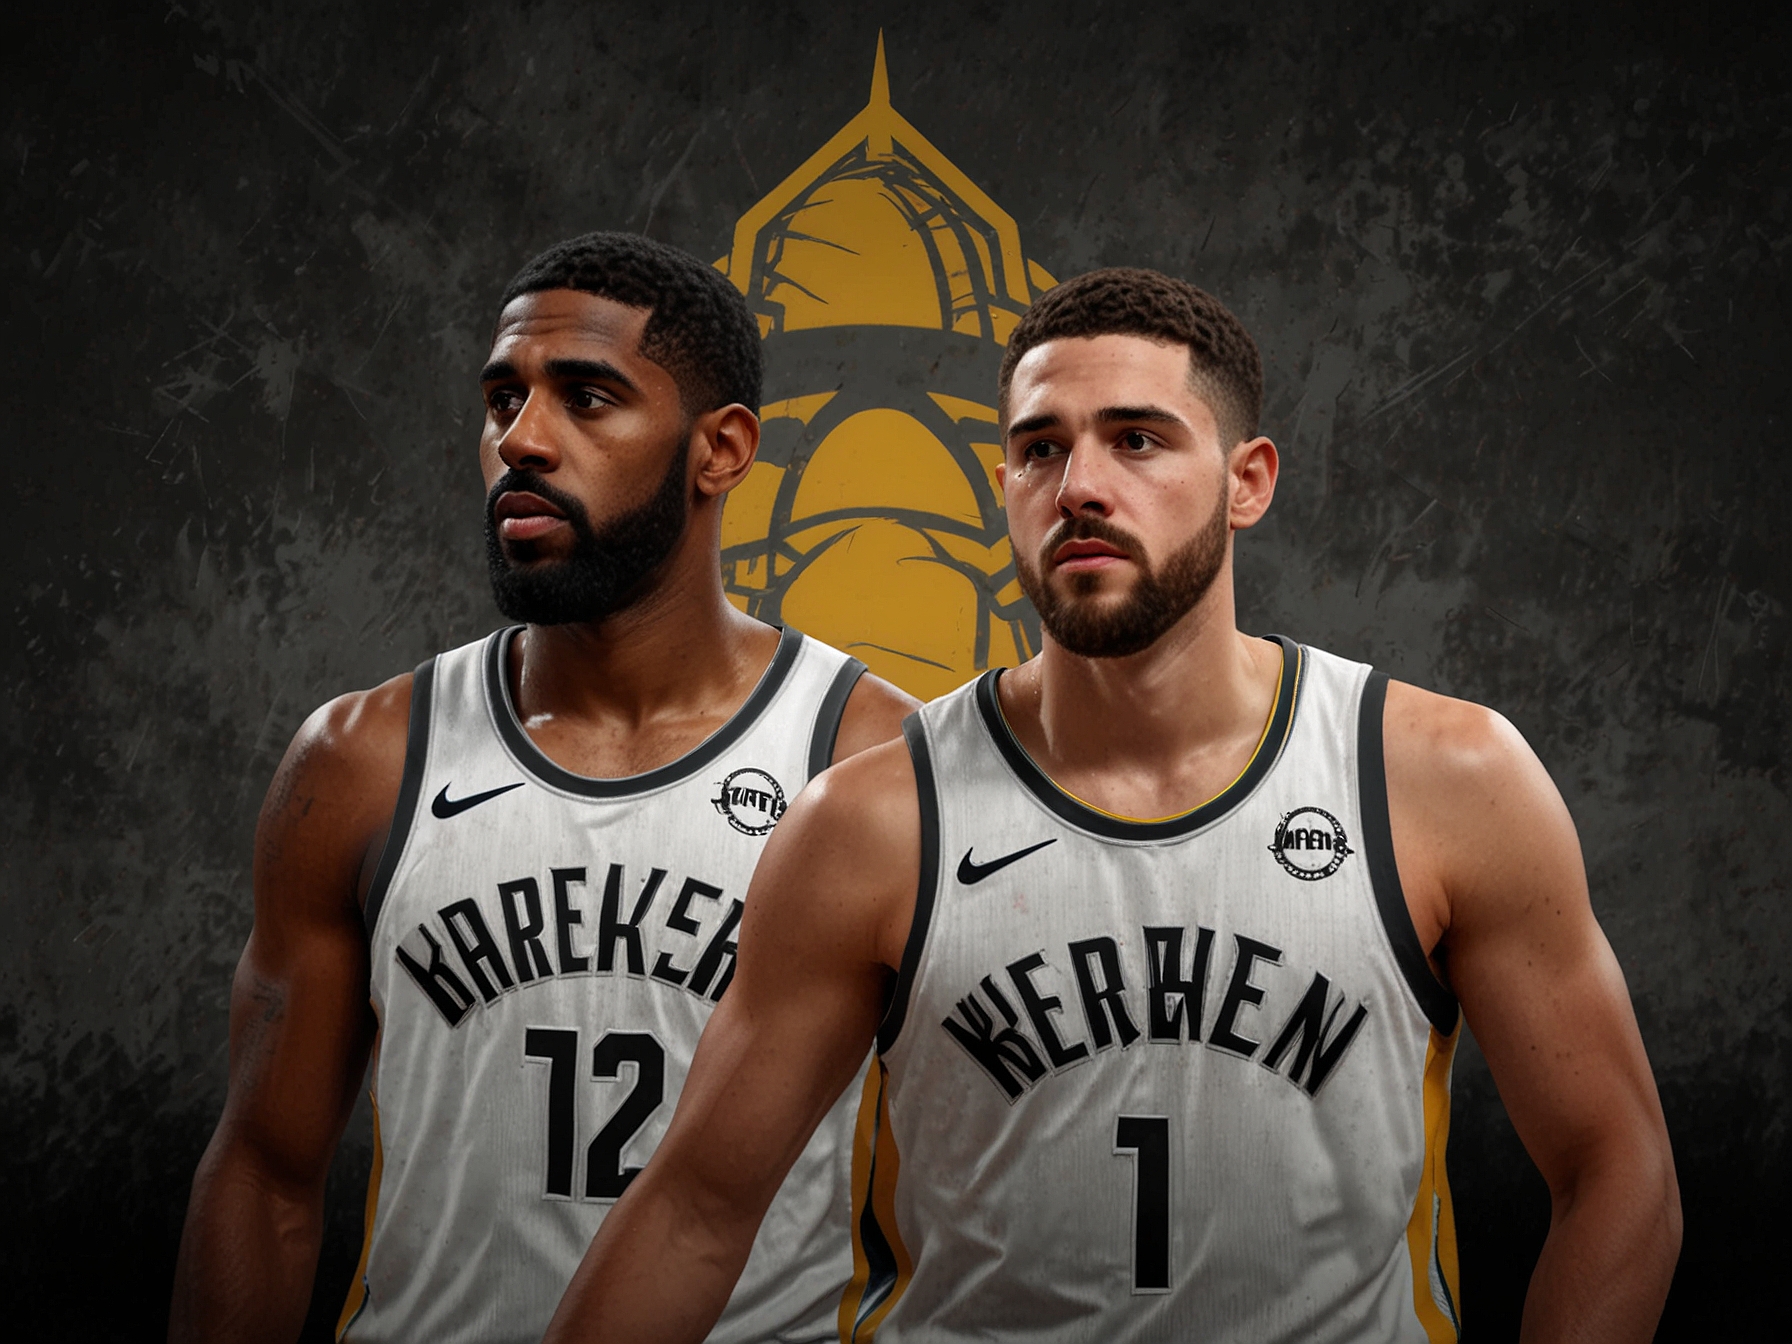 A graphic depicting Kyrie Irving and Klay Thompson in their new team uniforms after the Brooklyn Nets and Golden State Warriors trade, emphasizing their new roles and expected impact.